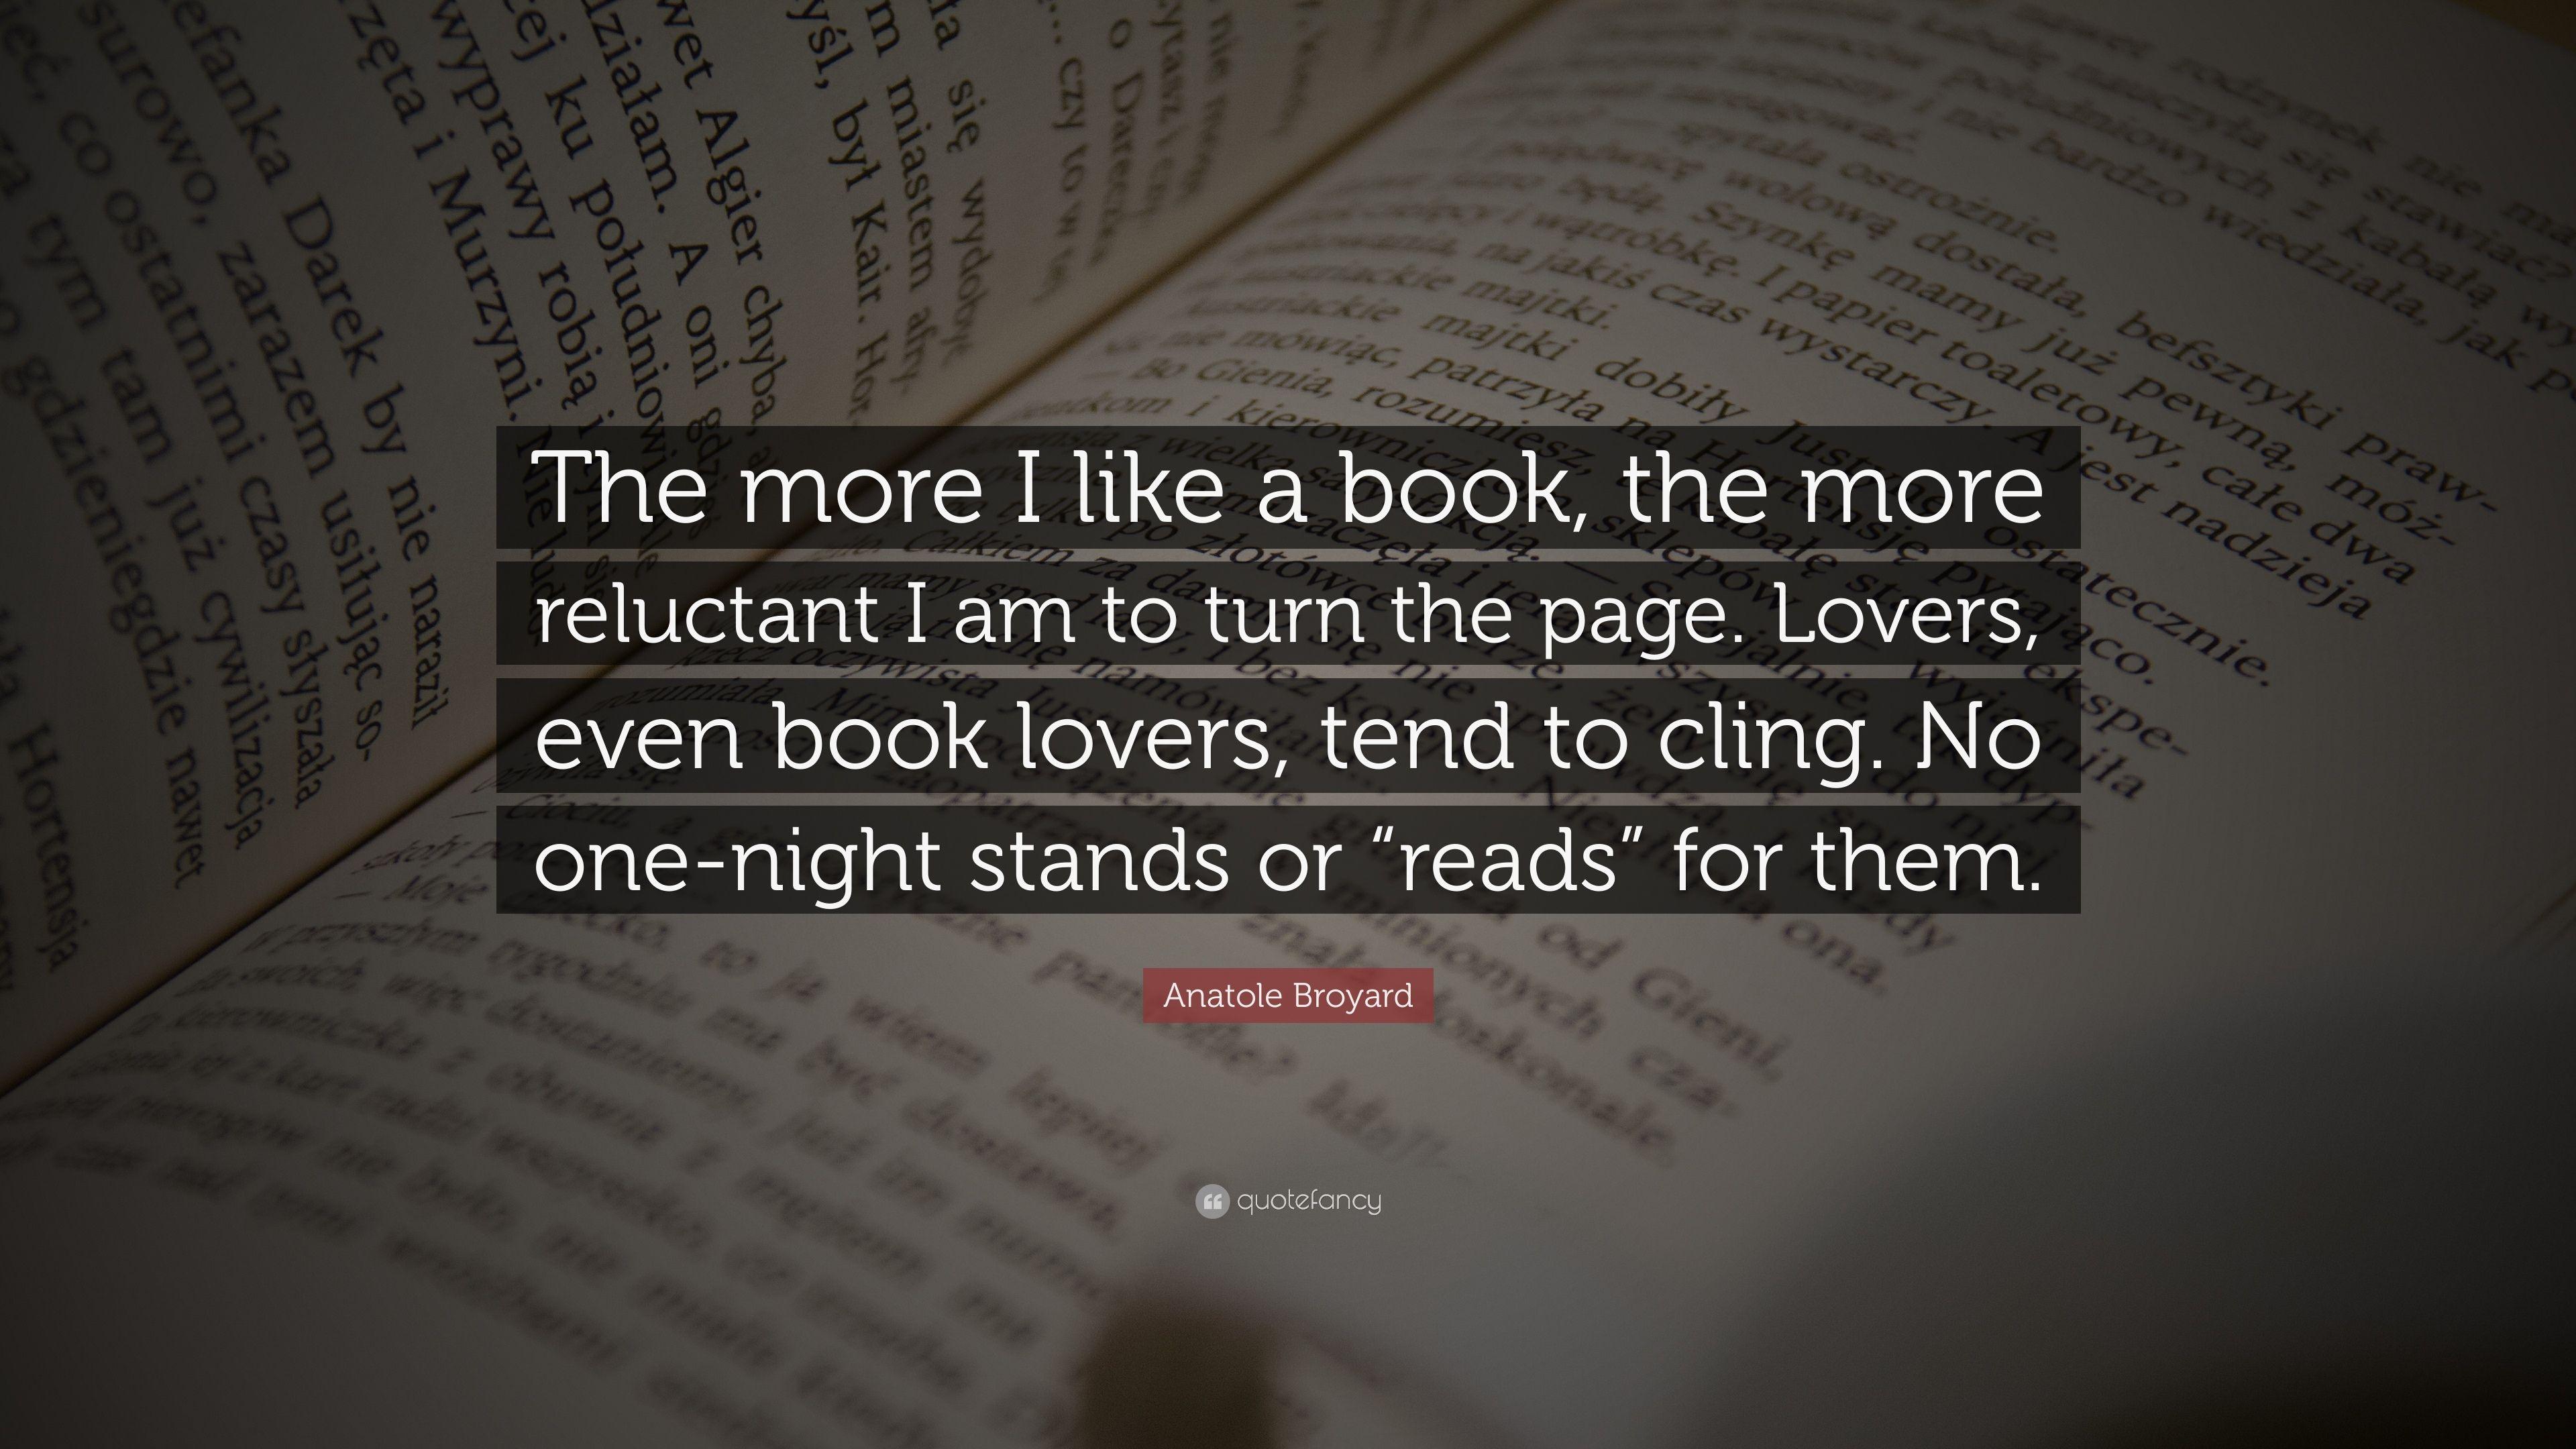 Anatole Broyard Quote: “The more I like a book, the more reluctant